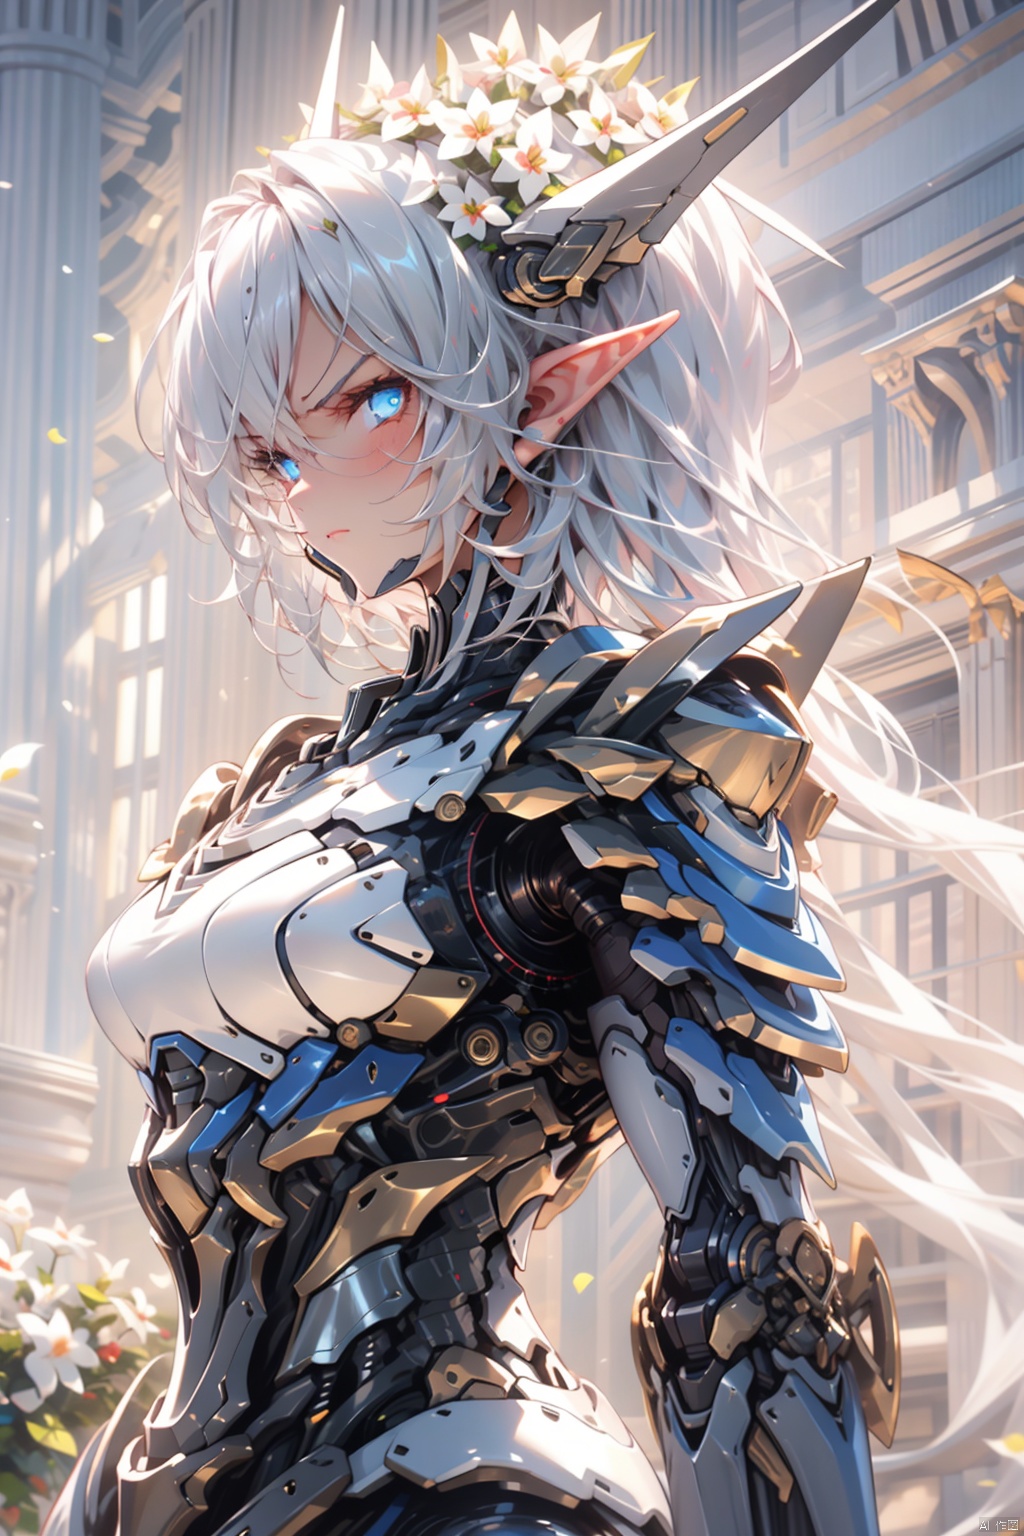  masterpiece, high quality best quality,close up,1girl, Angry, Elf, Princess, Castle, Fantasy, Fiction, Royalty, Regal, Noble, Medieval, Armor, Battle, War, Warrior, Woman, Female, Strong, Powerful, Fierce, Brave, Determined, Resilient, Stoic, Pensive, Moody, Tempestuous, Brooding, Dark, Mysterious, Intense, Dramatic, Gloomy, Eerie, Haunting, Enchanting, Magical, Ethereal, Elven, Pointed Ears, machinery